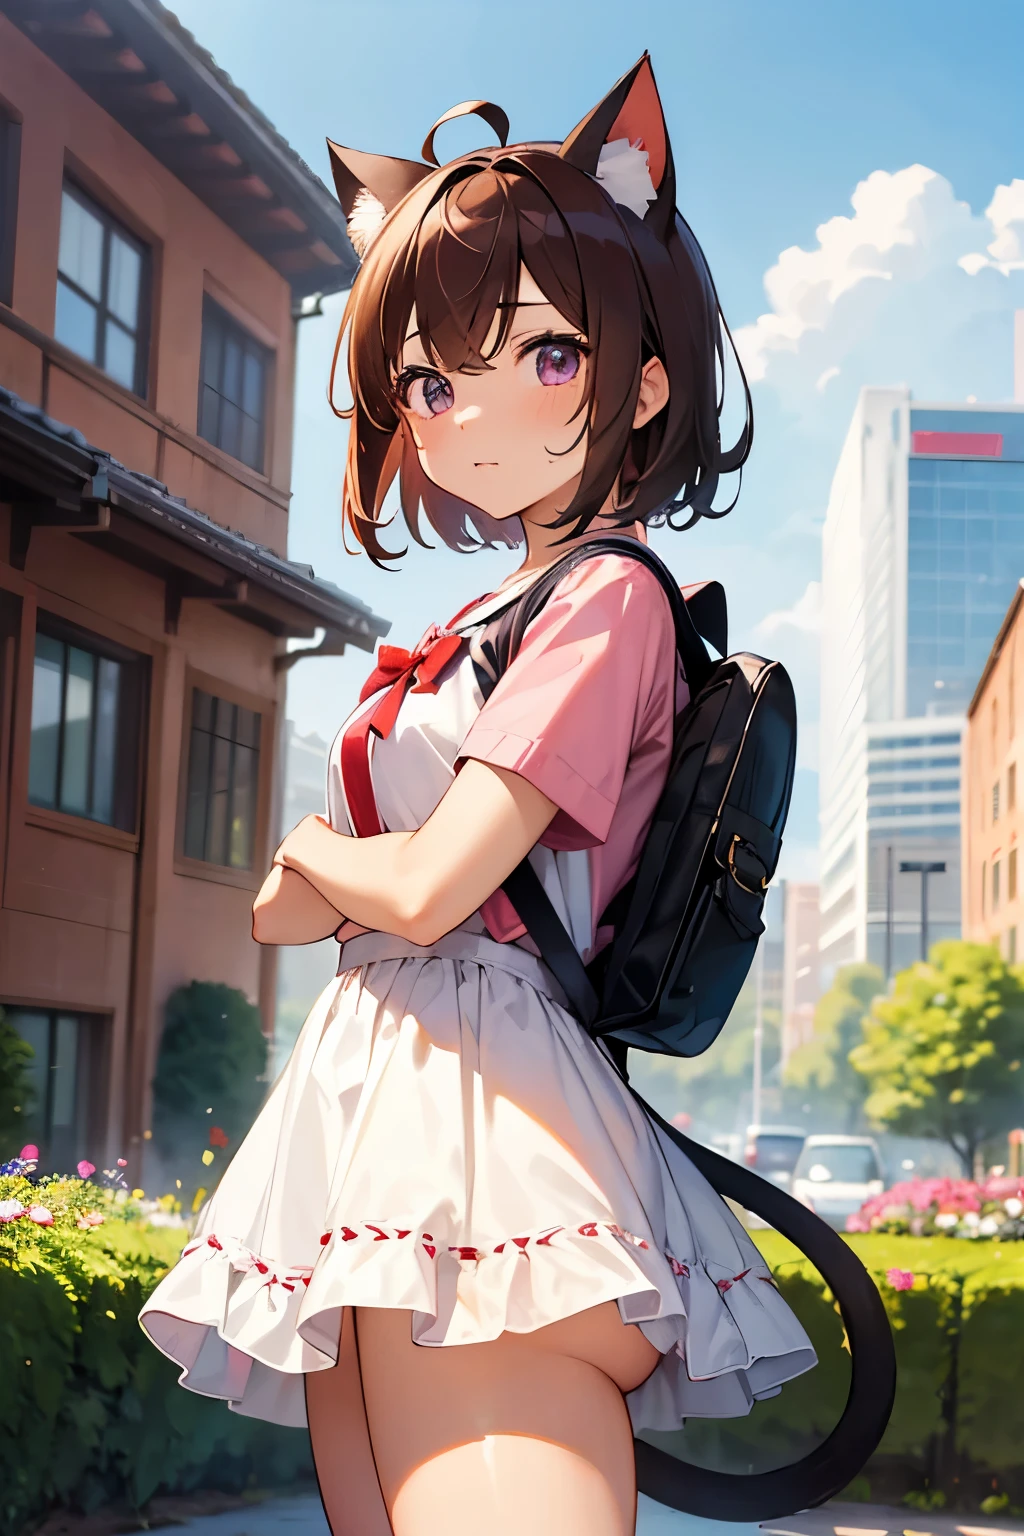 masterpiece, Highest quality, High resolution, A girl with a young body, alone, Brown Hair, Medium Short Hair, Purple eyes, (Mr.々Expression、Red face)、Mole under the eye, Cowboy Shot, Cute Underwear, Battera, shame, city, Outdoor, garden, With a backpack on, Ahoge、Character Bag、Cat Cosplay、Cat ear、Cat tail、A tail peeking out from under a skirt、Cat meat ball handbag、(randoseru backpack:1.3)